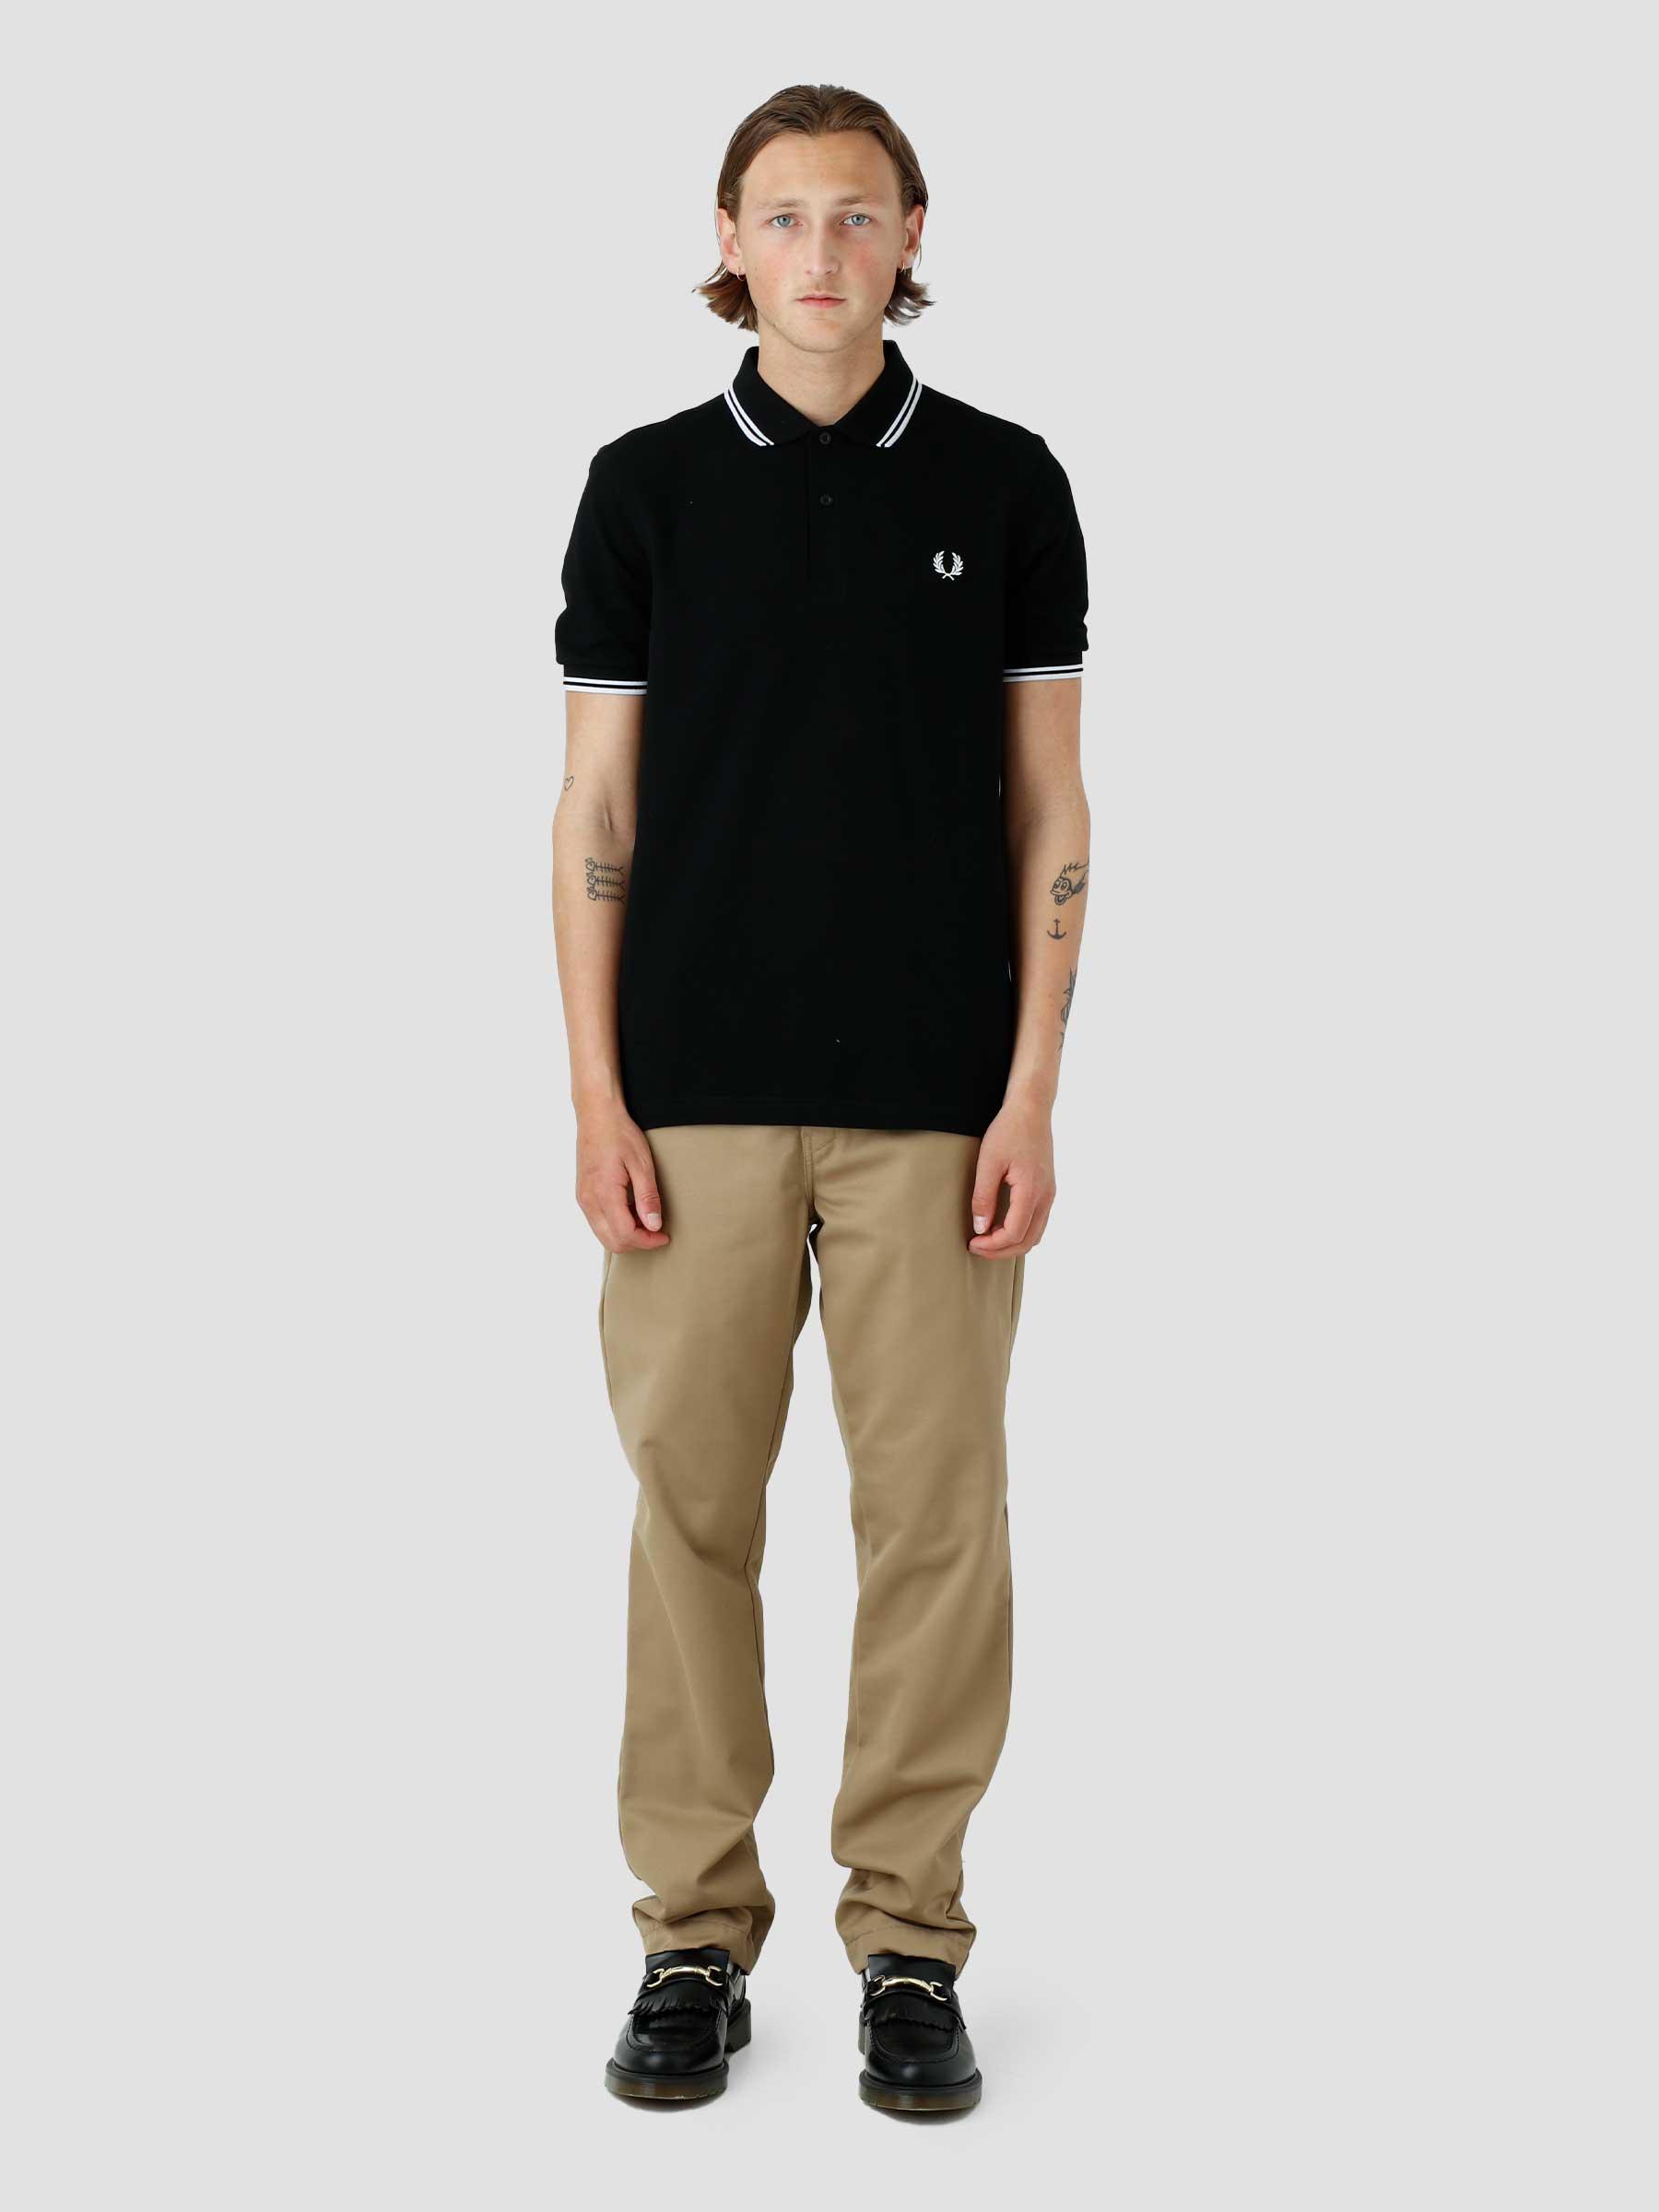 Twin Tipped Fred Perry Shirt Black M3600-350